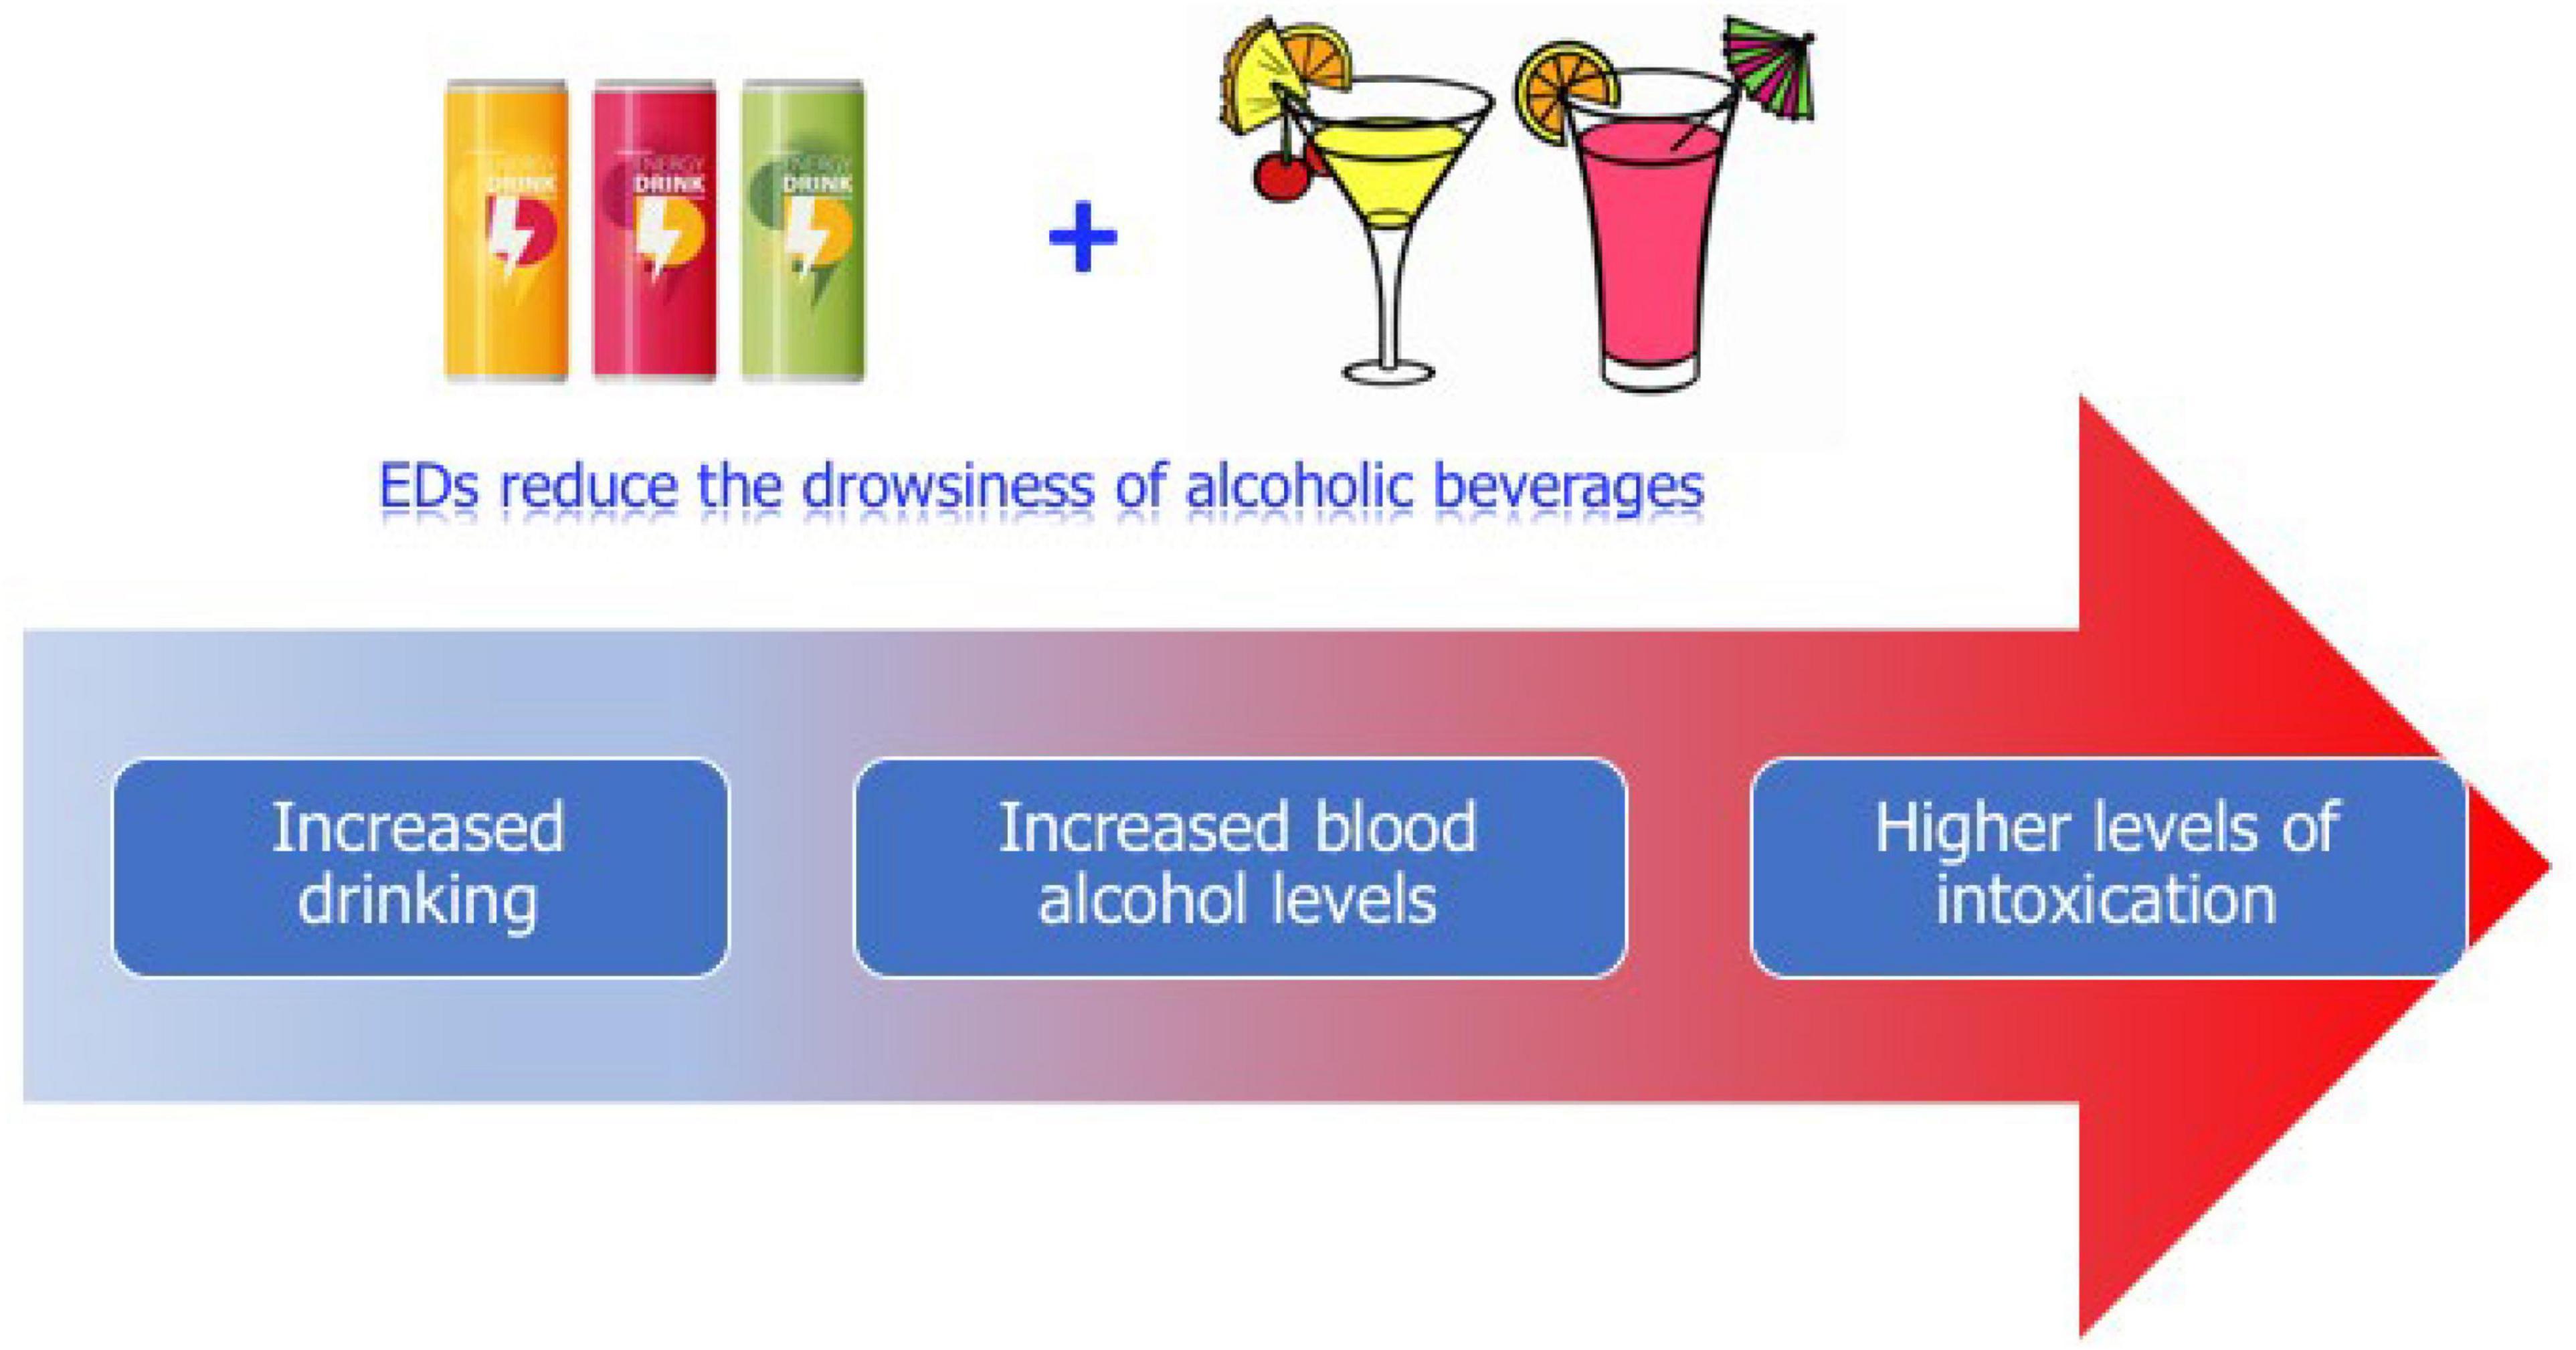 Energy drinks at adolescence: Awareness or unawareness?